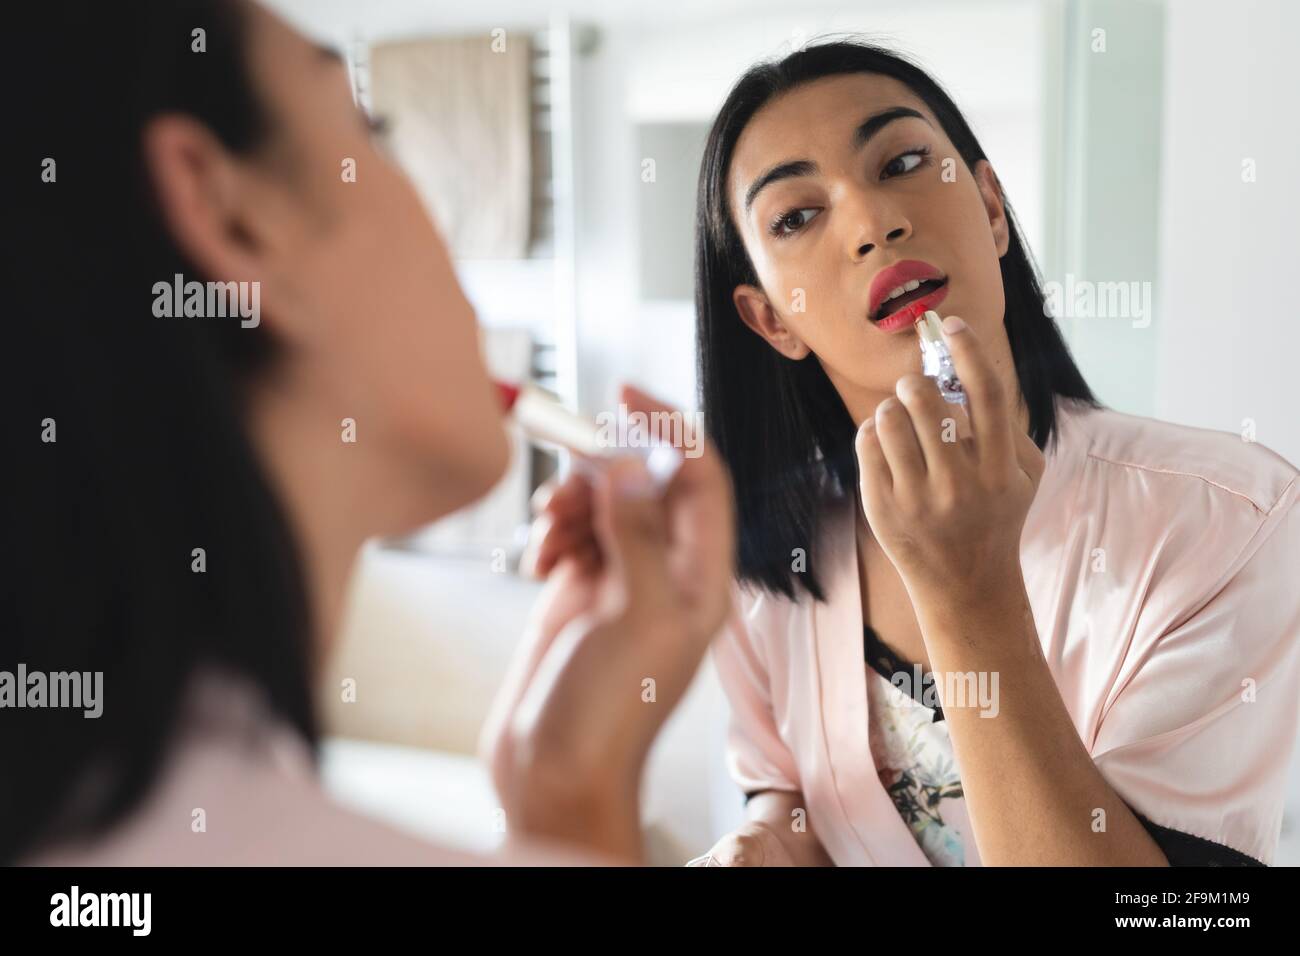 Mixed race transgender woman looking in bathroom mirror and putting on lipstick Stock Photo